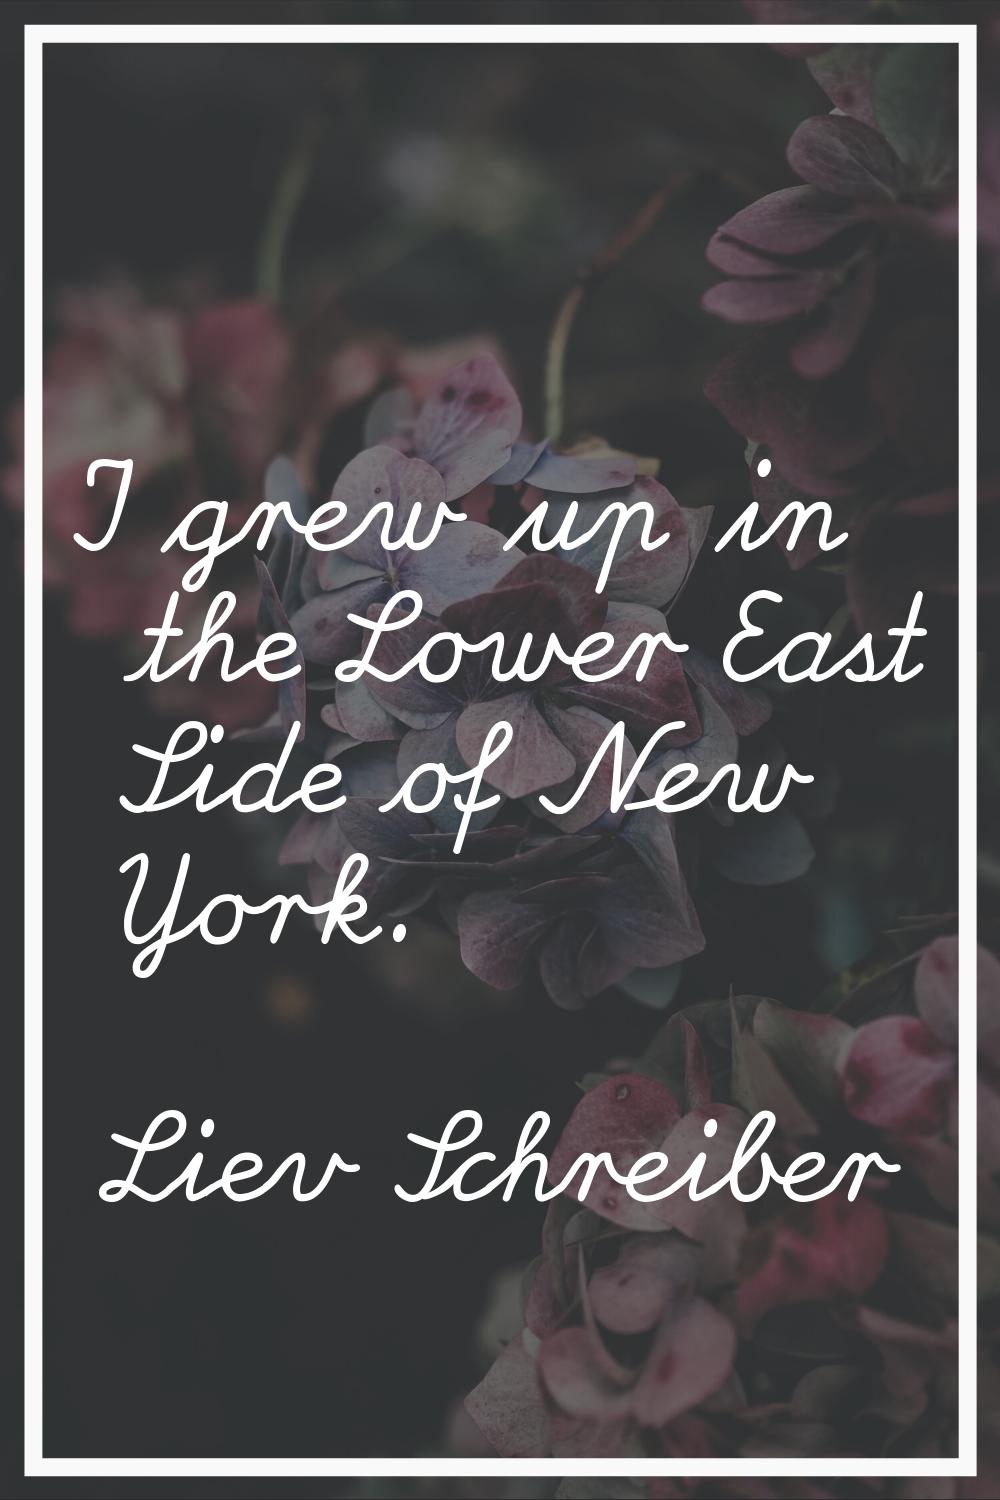 I grew up in the Lower East Side of New York.